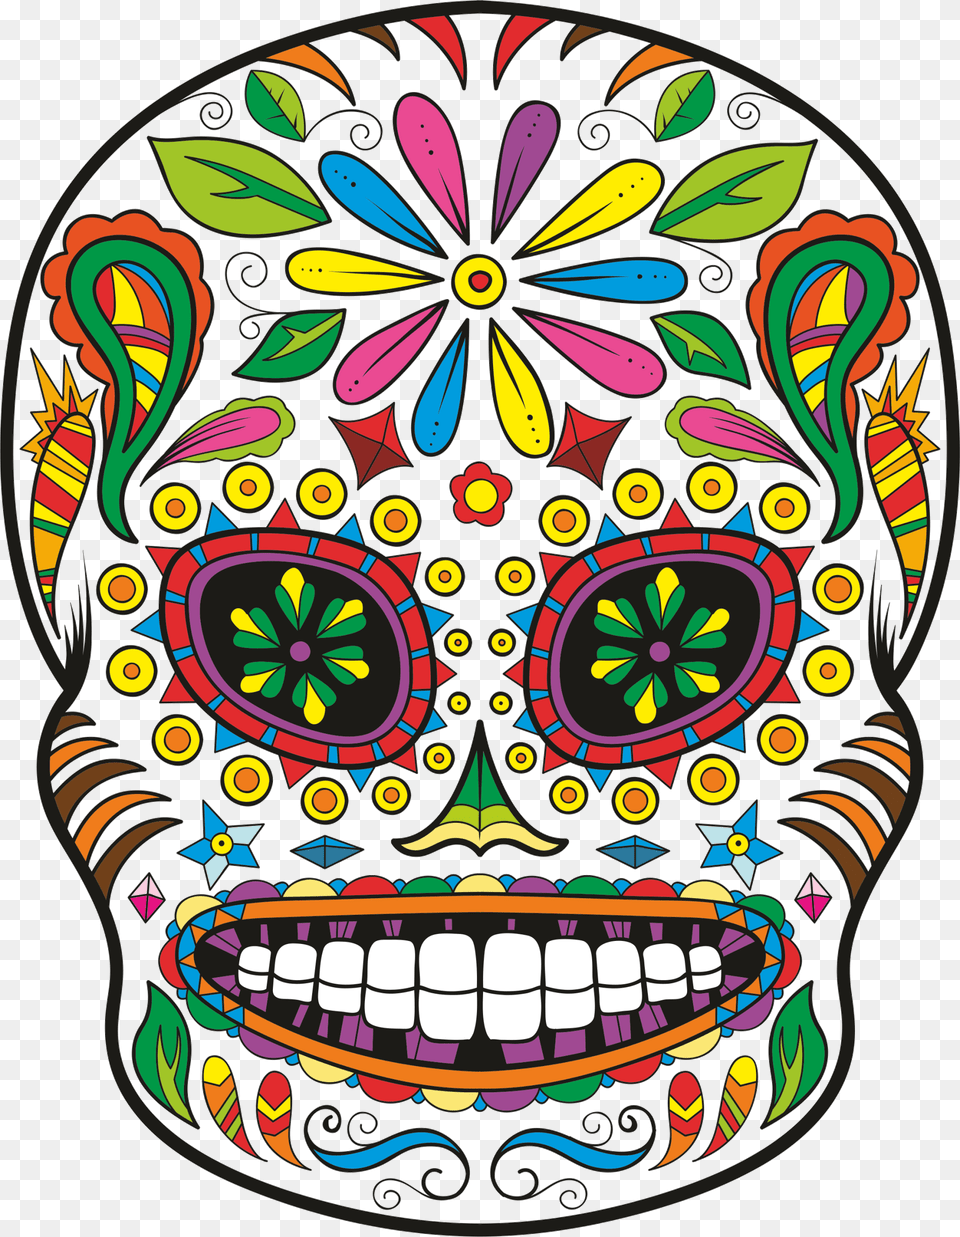 Calavera Day Of The Dead Skull Sticker Decal Colorful Sugar Skull Designs, Art, Doodle, Drawing, Pattern Free Transparent Png